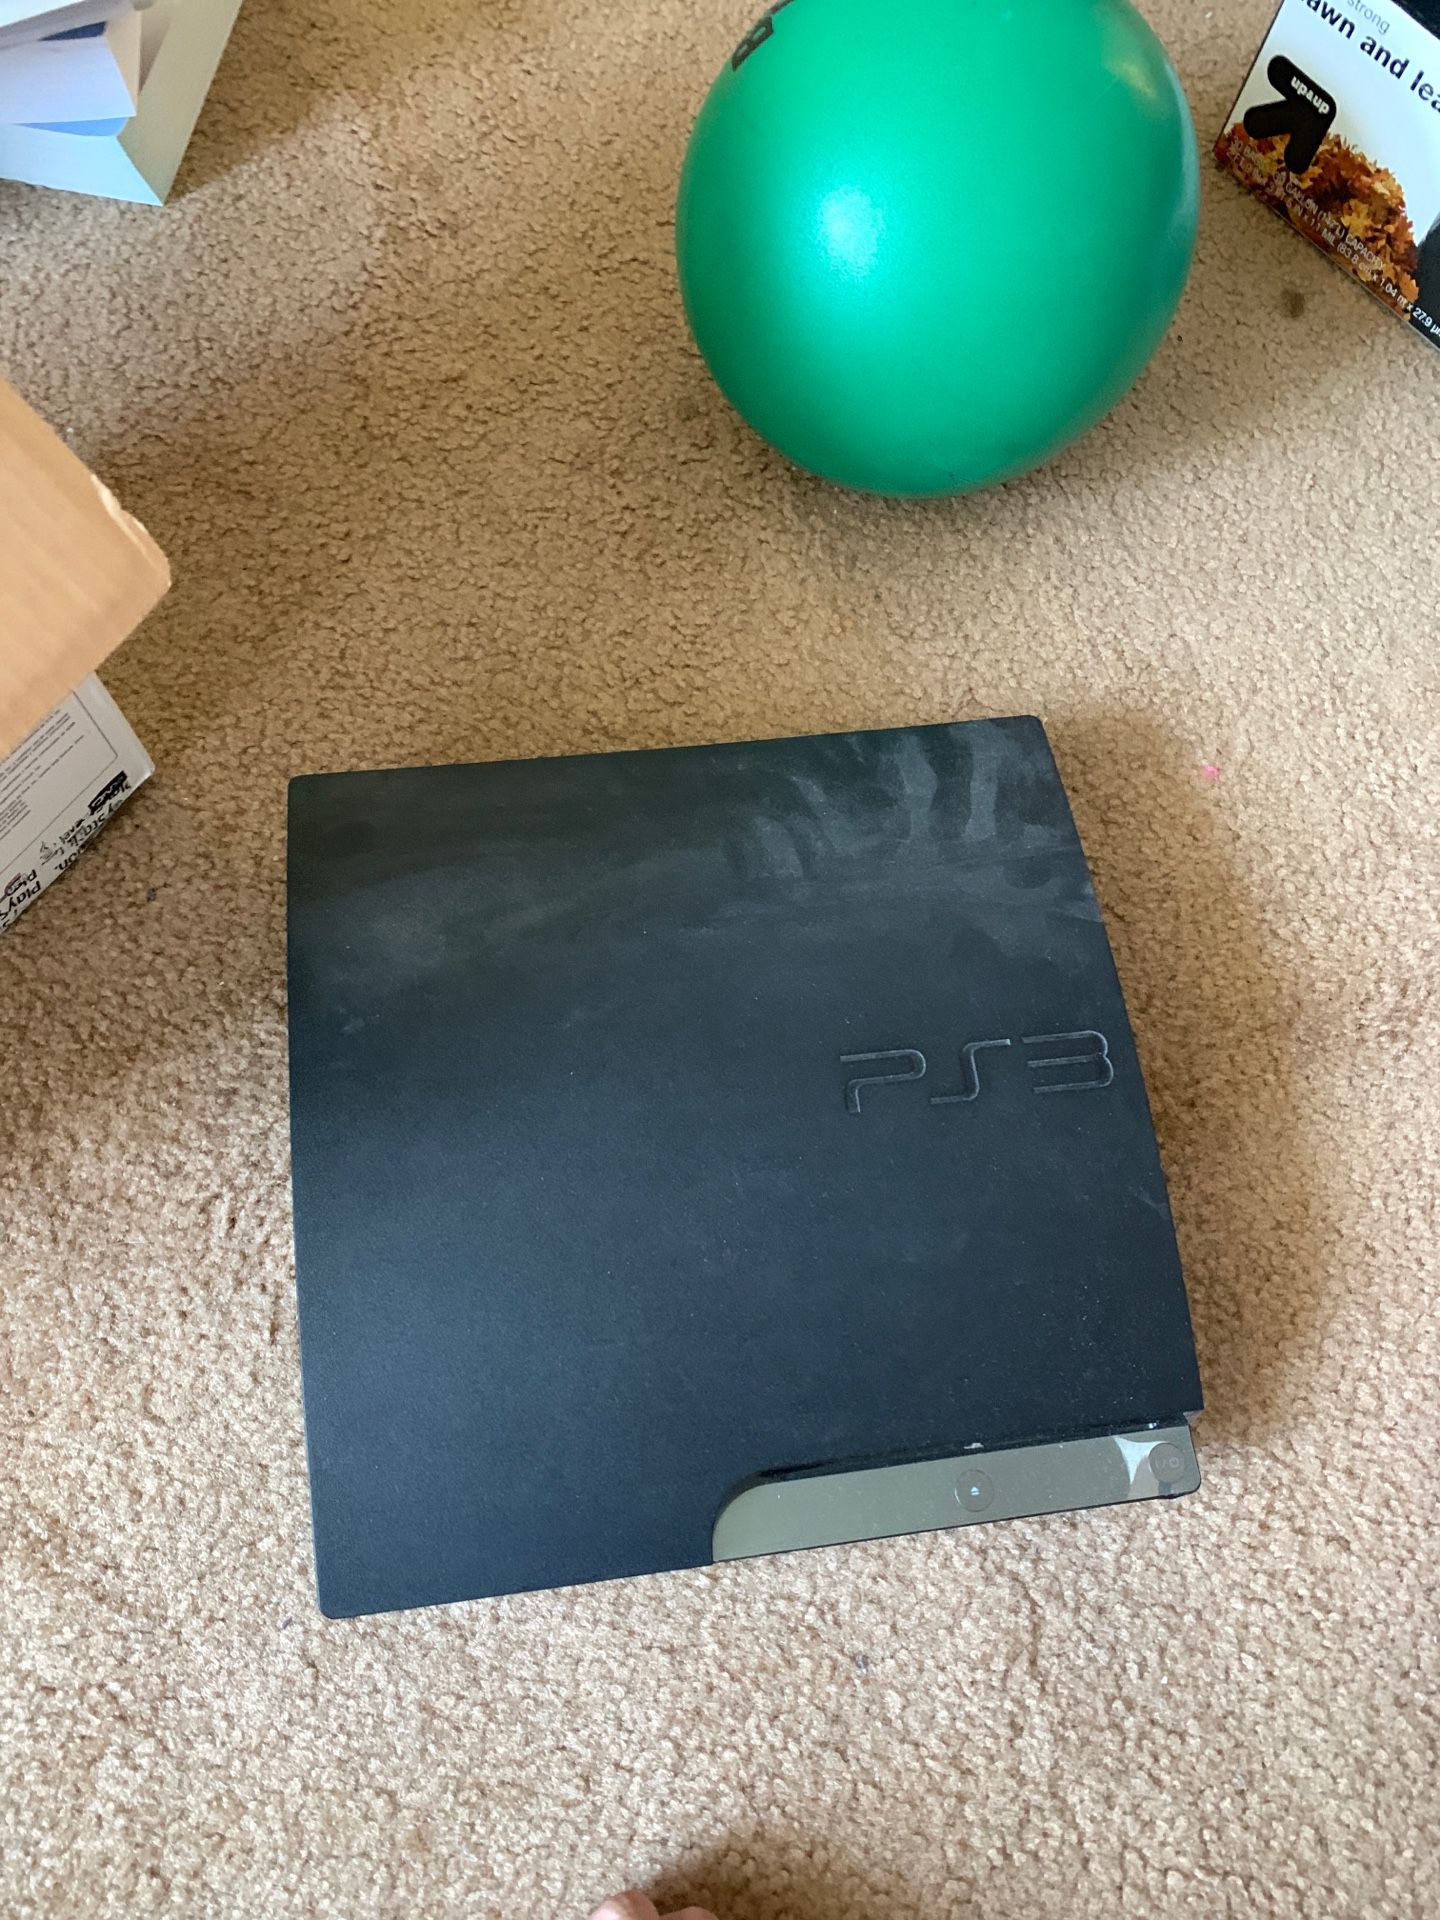 PS3 no controllers or cords